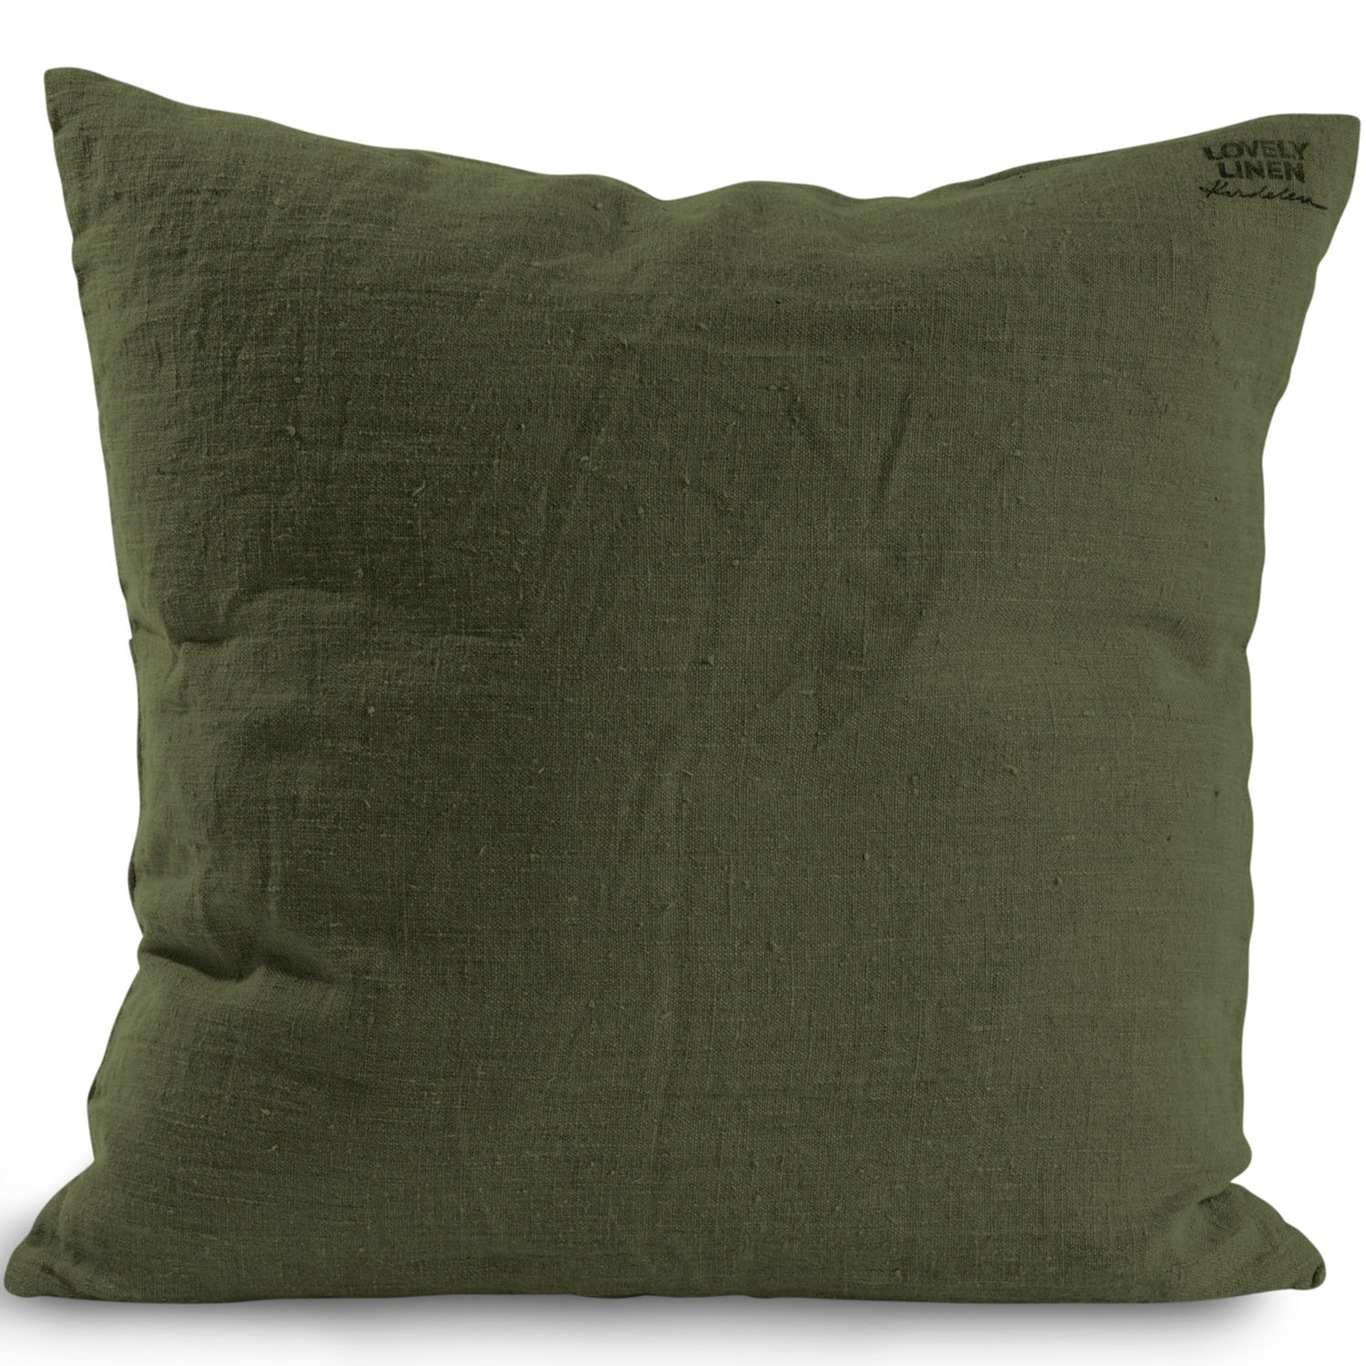 Lovely Kuddfodral 50x50 cm, Jeep Green